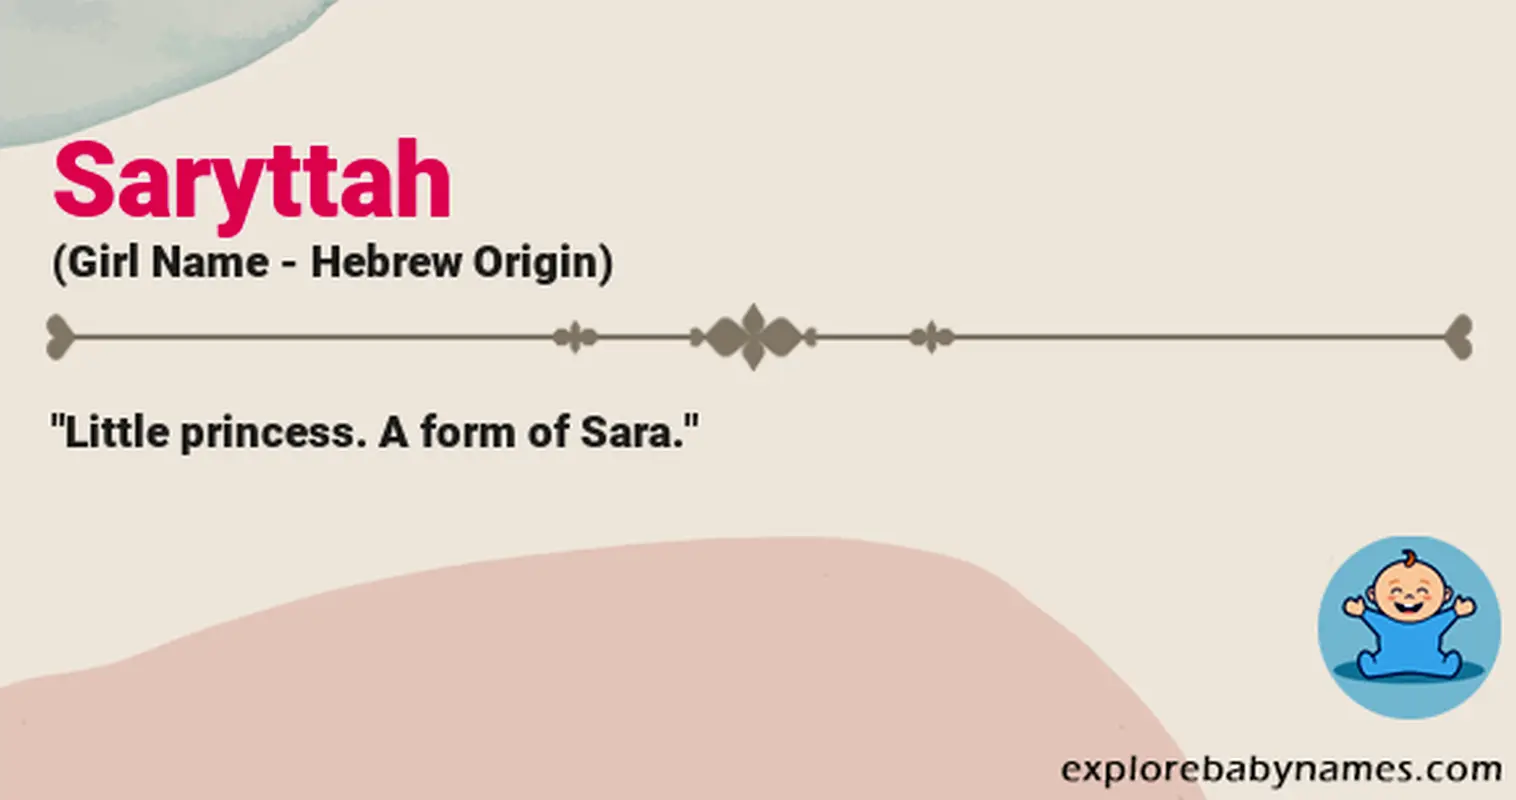 Meaning of Saryttah